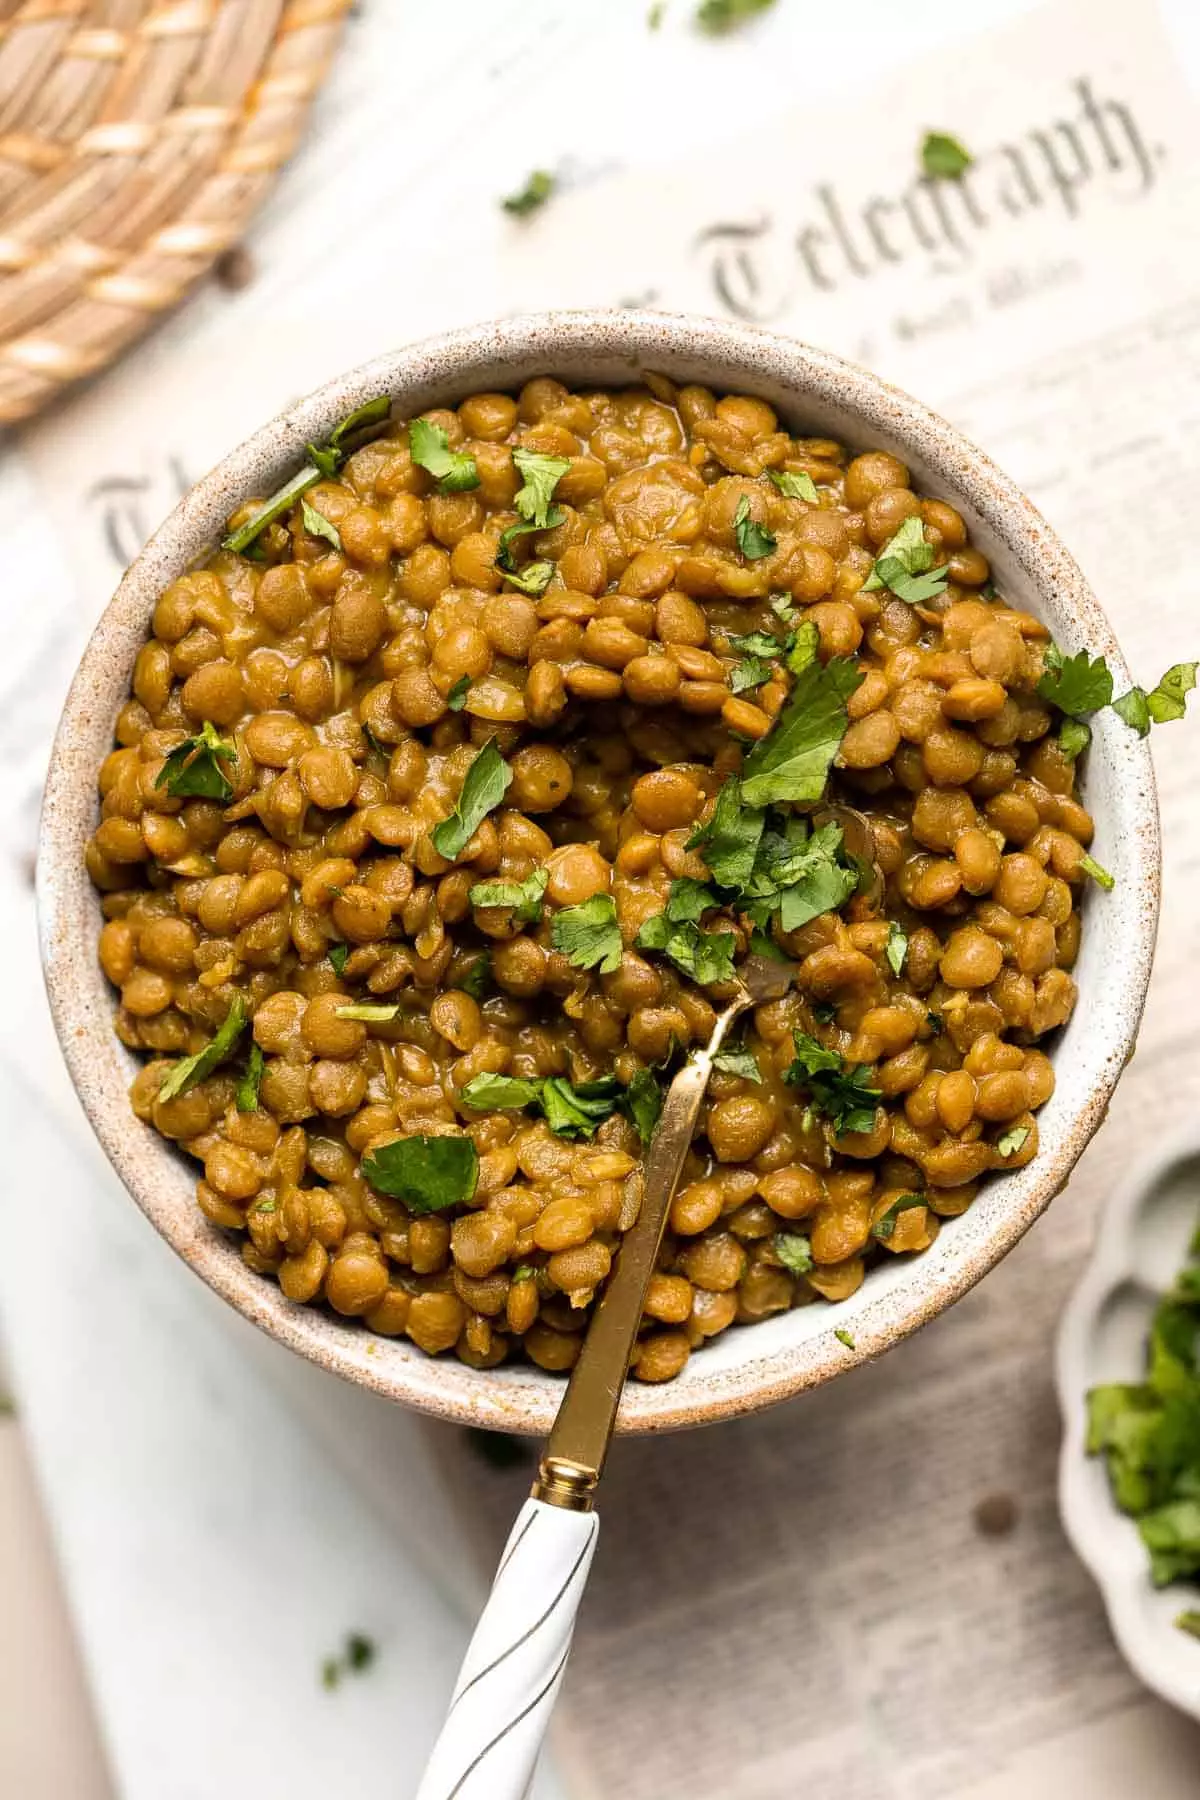 Easy 20-Minute One Pot Lentils are a healthy, nourishing, and delicious vegan meal that is easy to make in a few simple steps. Make a big batch and freeze!